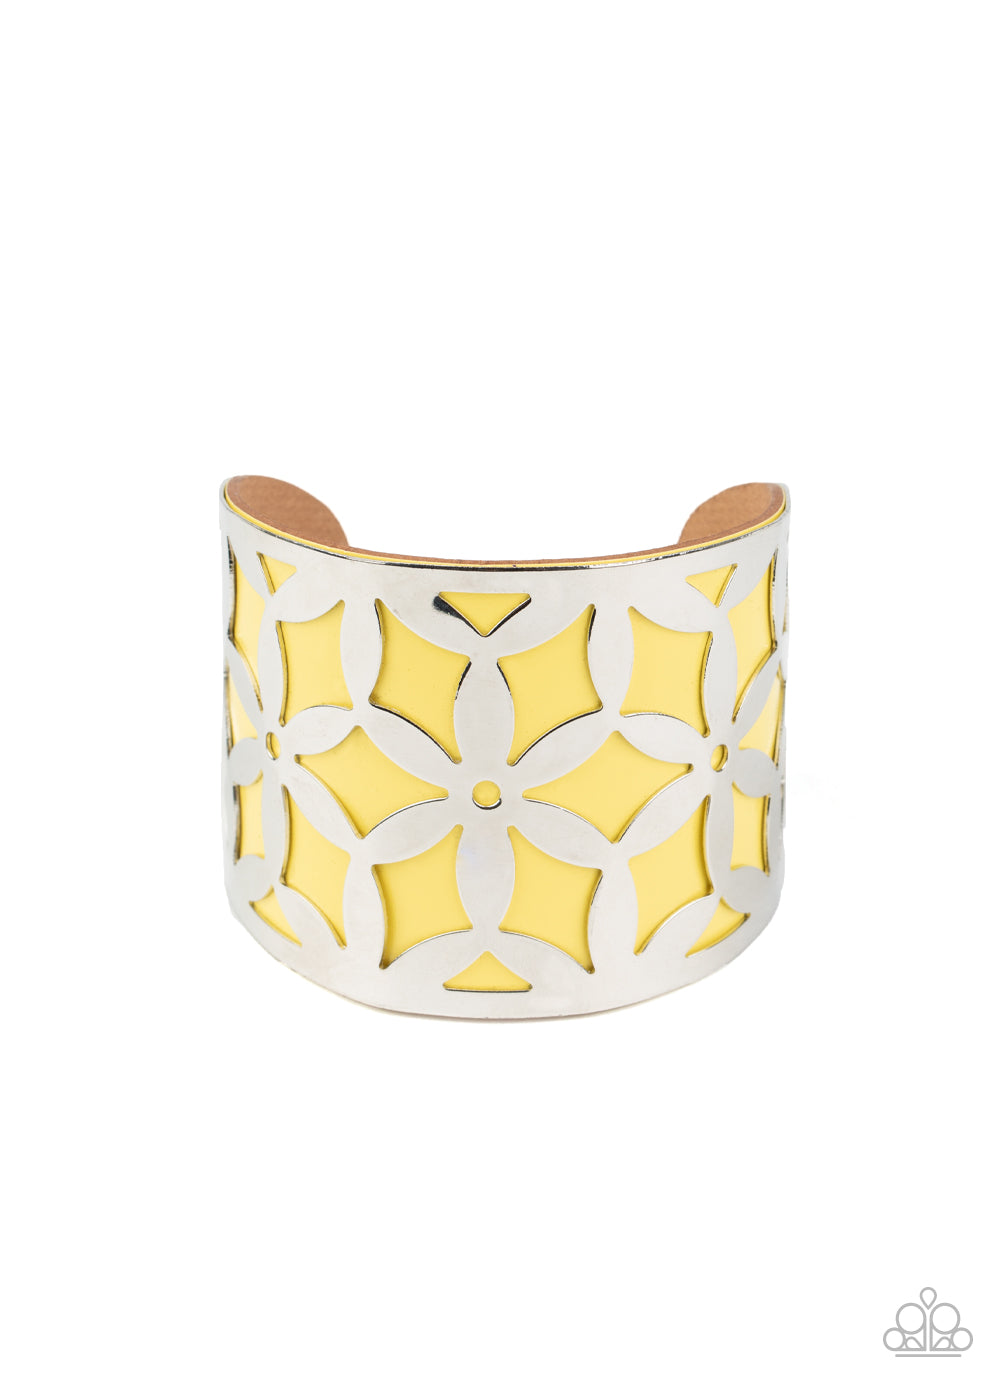 &lt;P&gt;A thick piece of yellow leather peeks out through a daisy stenciled silver cuff, creating a colorful centerpiece around the wrist.&lt;/P&gt;  

&lt;P&gt; &lt;I&gt;Sold as one individual bracelet.&lt;/I&gt;  &lt;/P&gt;


&lt;img src=\&quot;https://d9b54x484lq62.cloudfront.net/paparazzi/shopping/images/517_tag150x115_1.png\&quot; alt=\&quot;New Kit\&quot; align=\&quot;middle\&quot; height=\&quot;50\&quot; width=\&quot;50\&quot;/&gt;